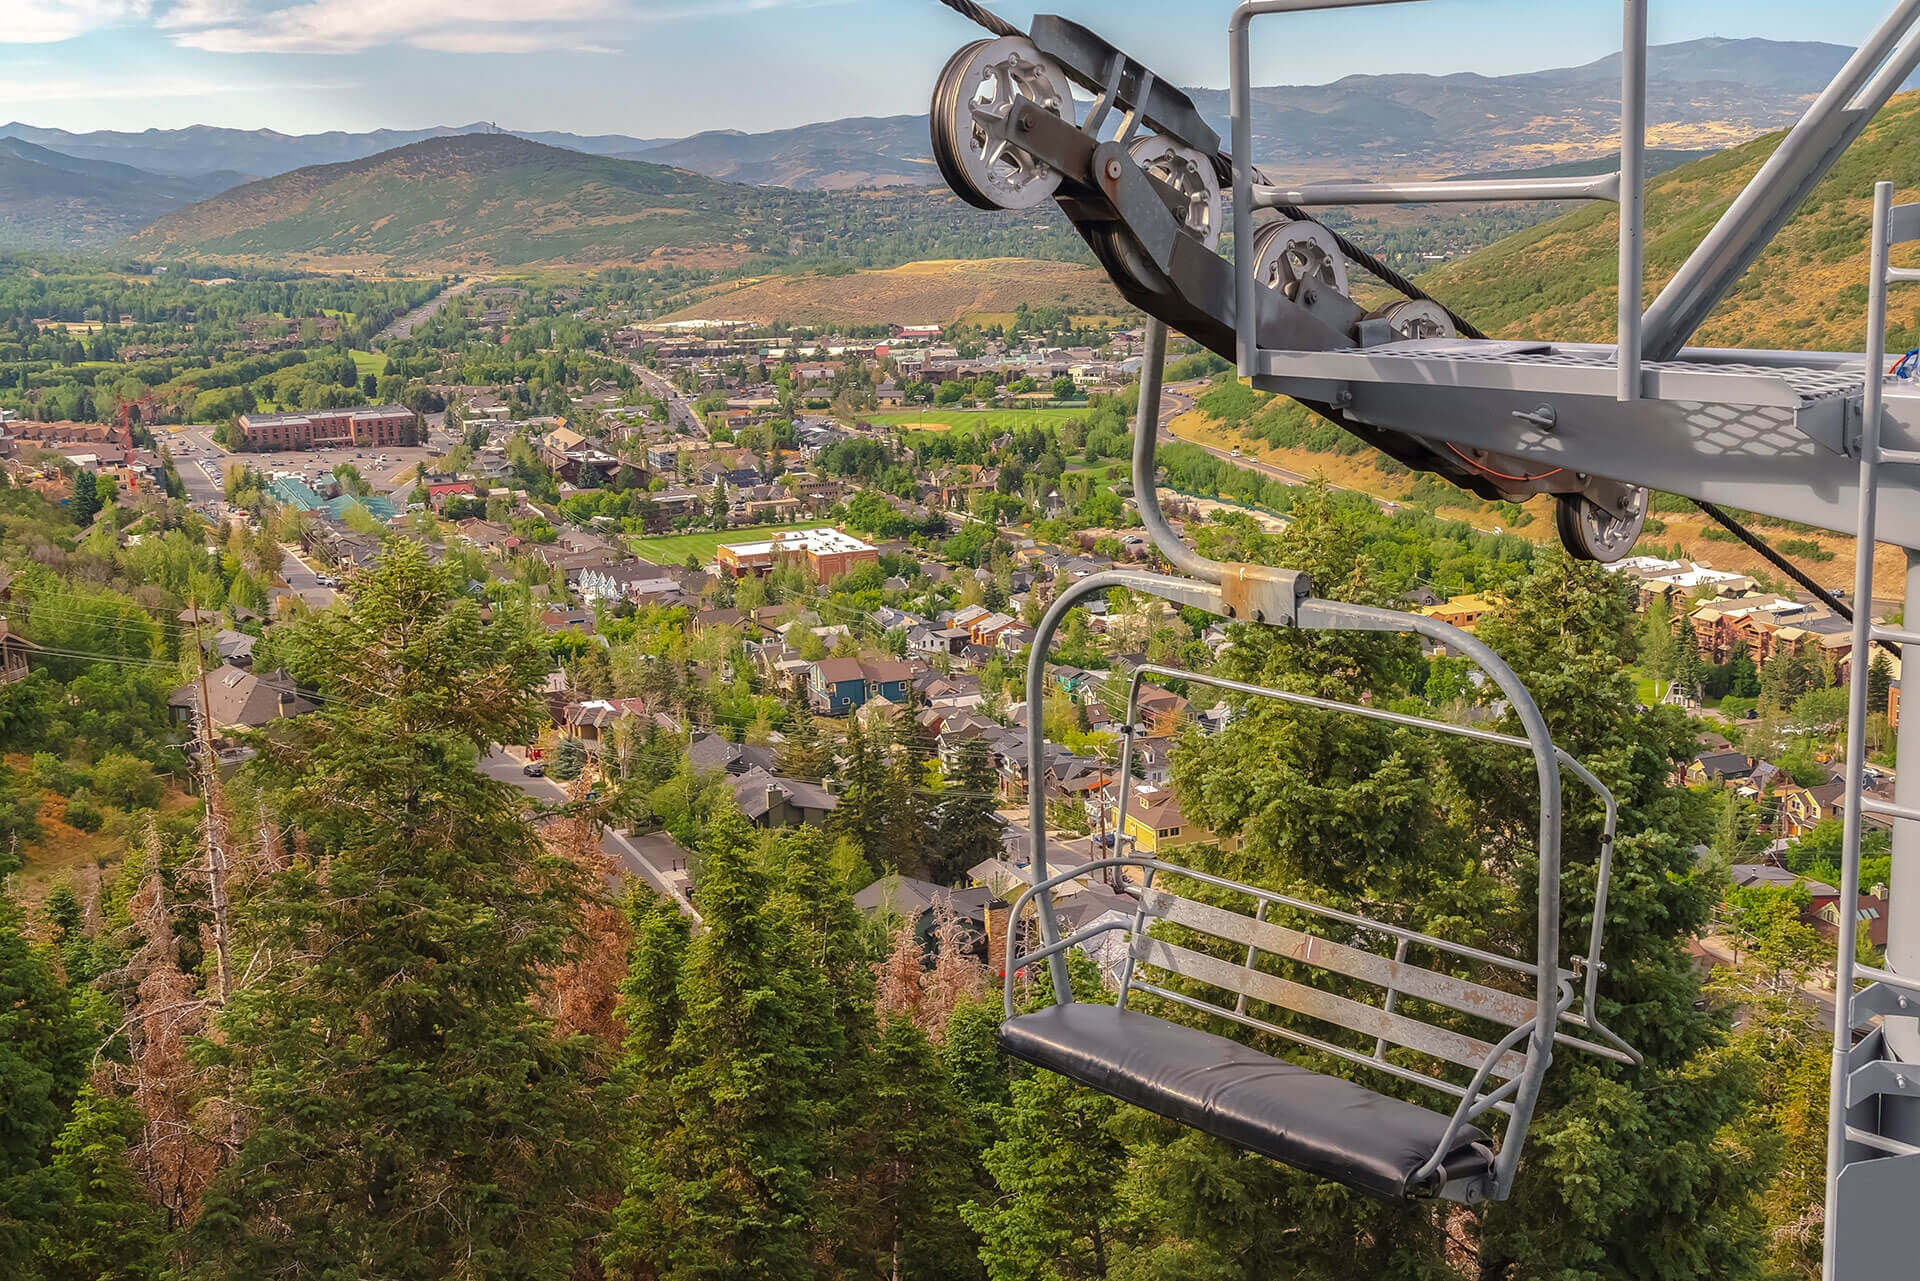 Summer Chairlift Near our Park City Vacation Rentals